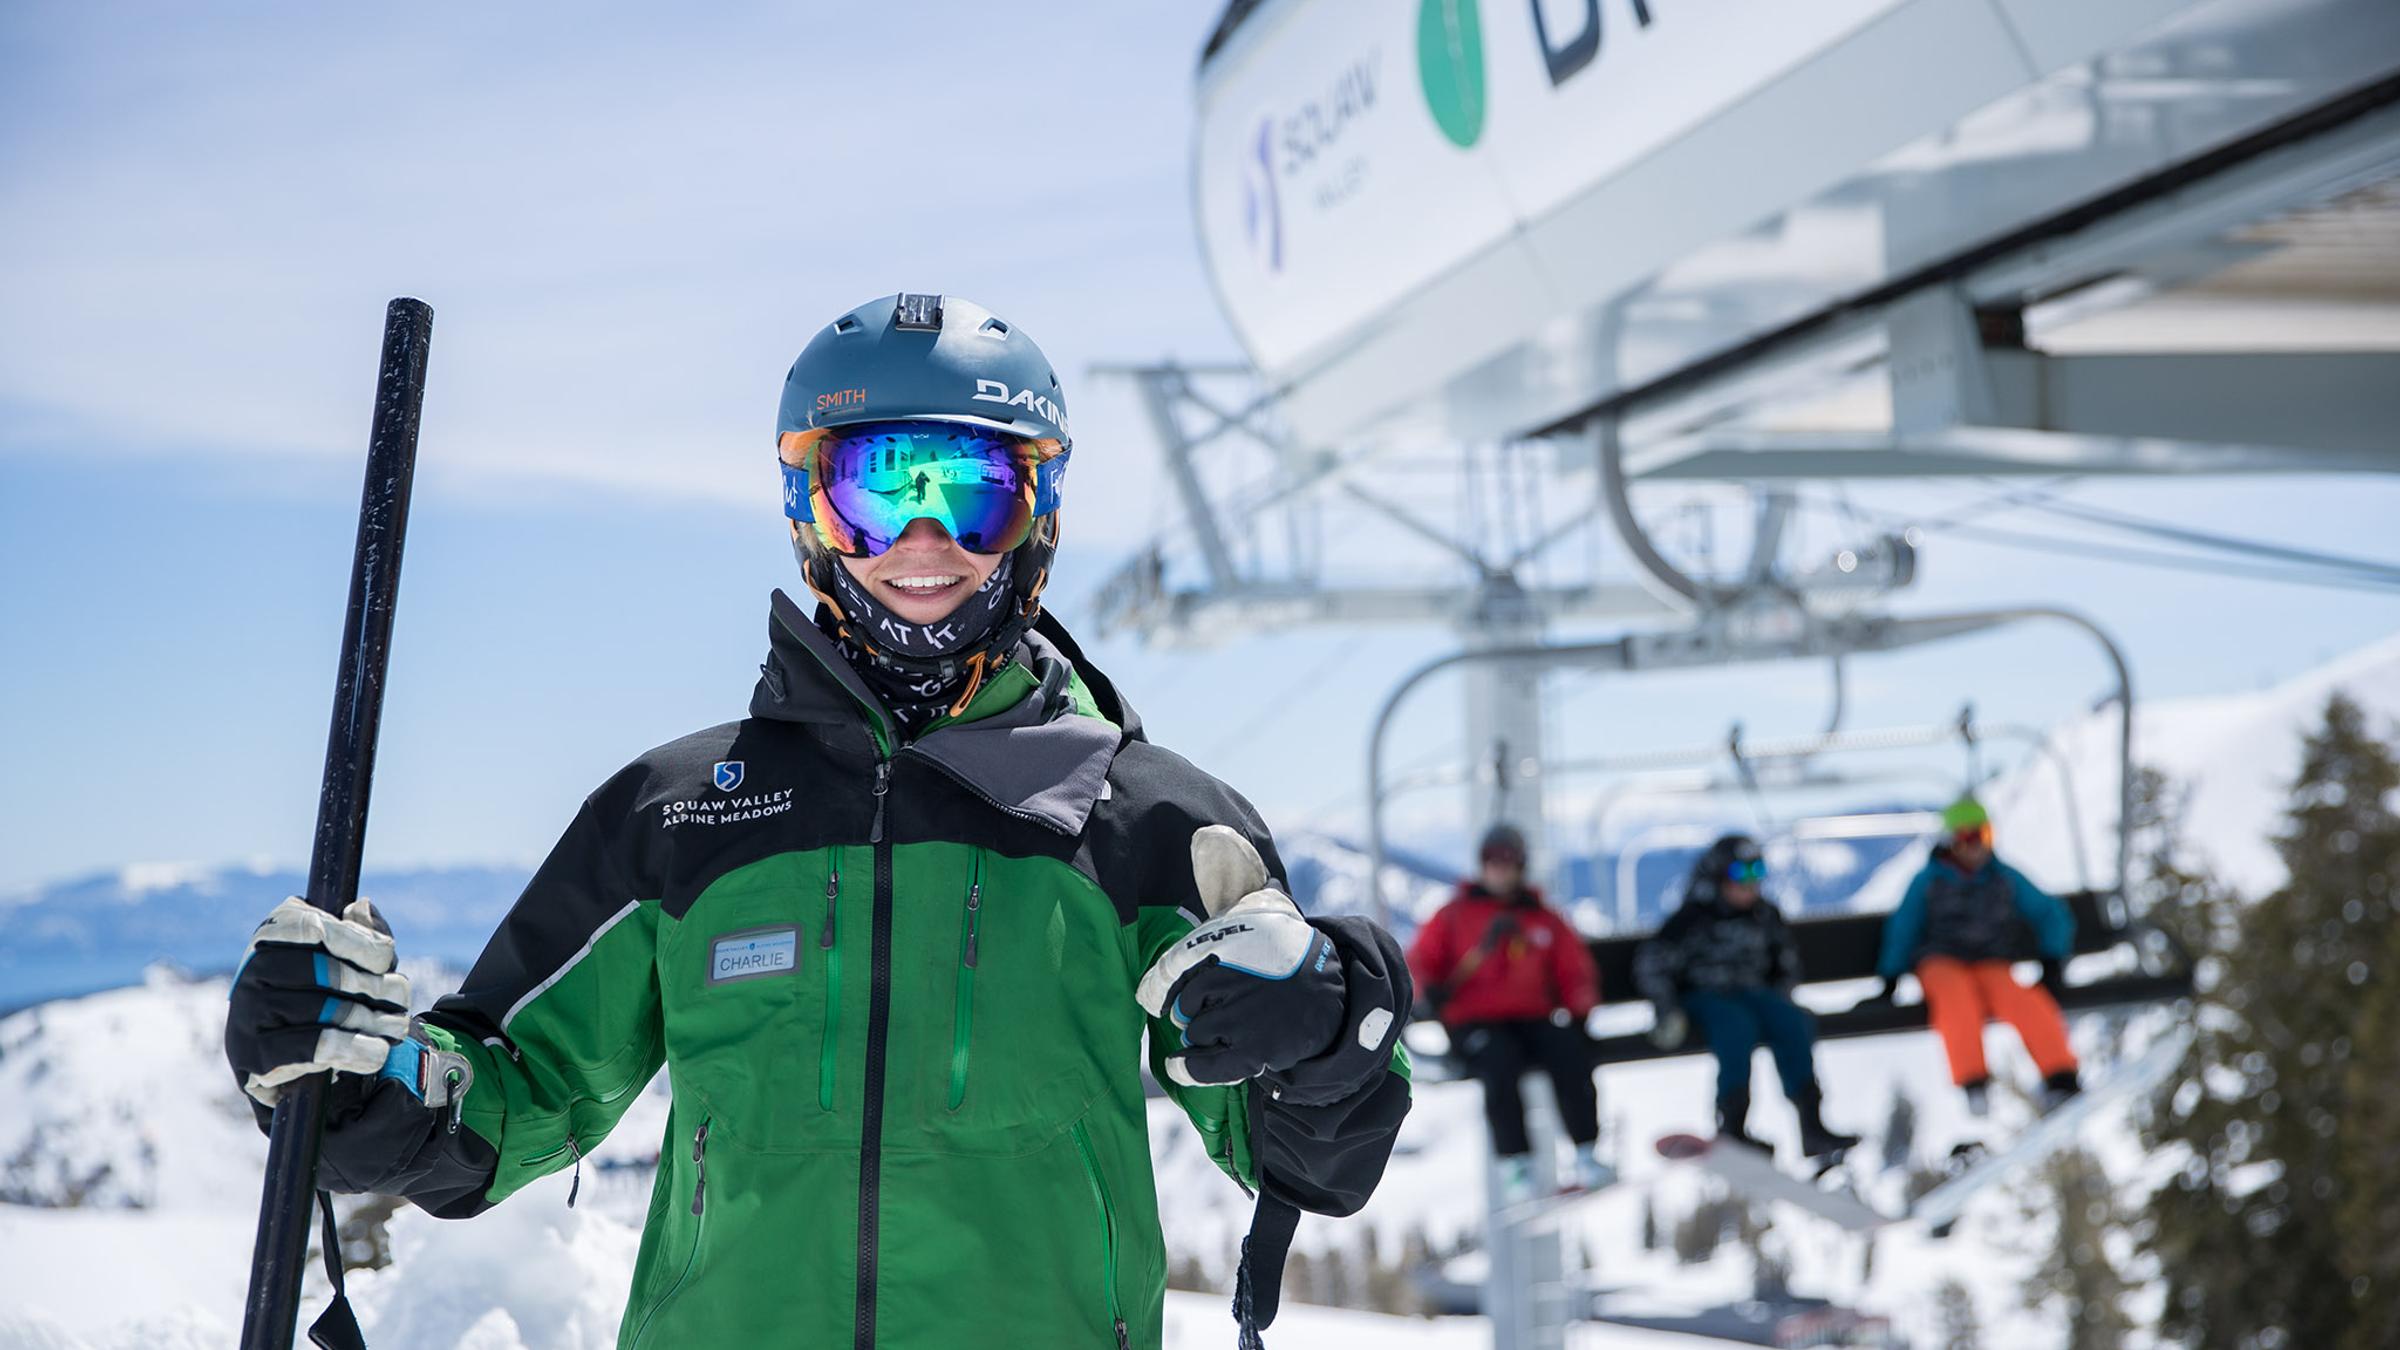 A lift attendant at the top of Big Blue giving a thumbs up with group unloading a chairlift in the background